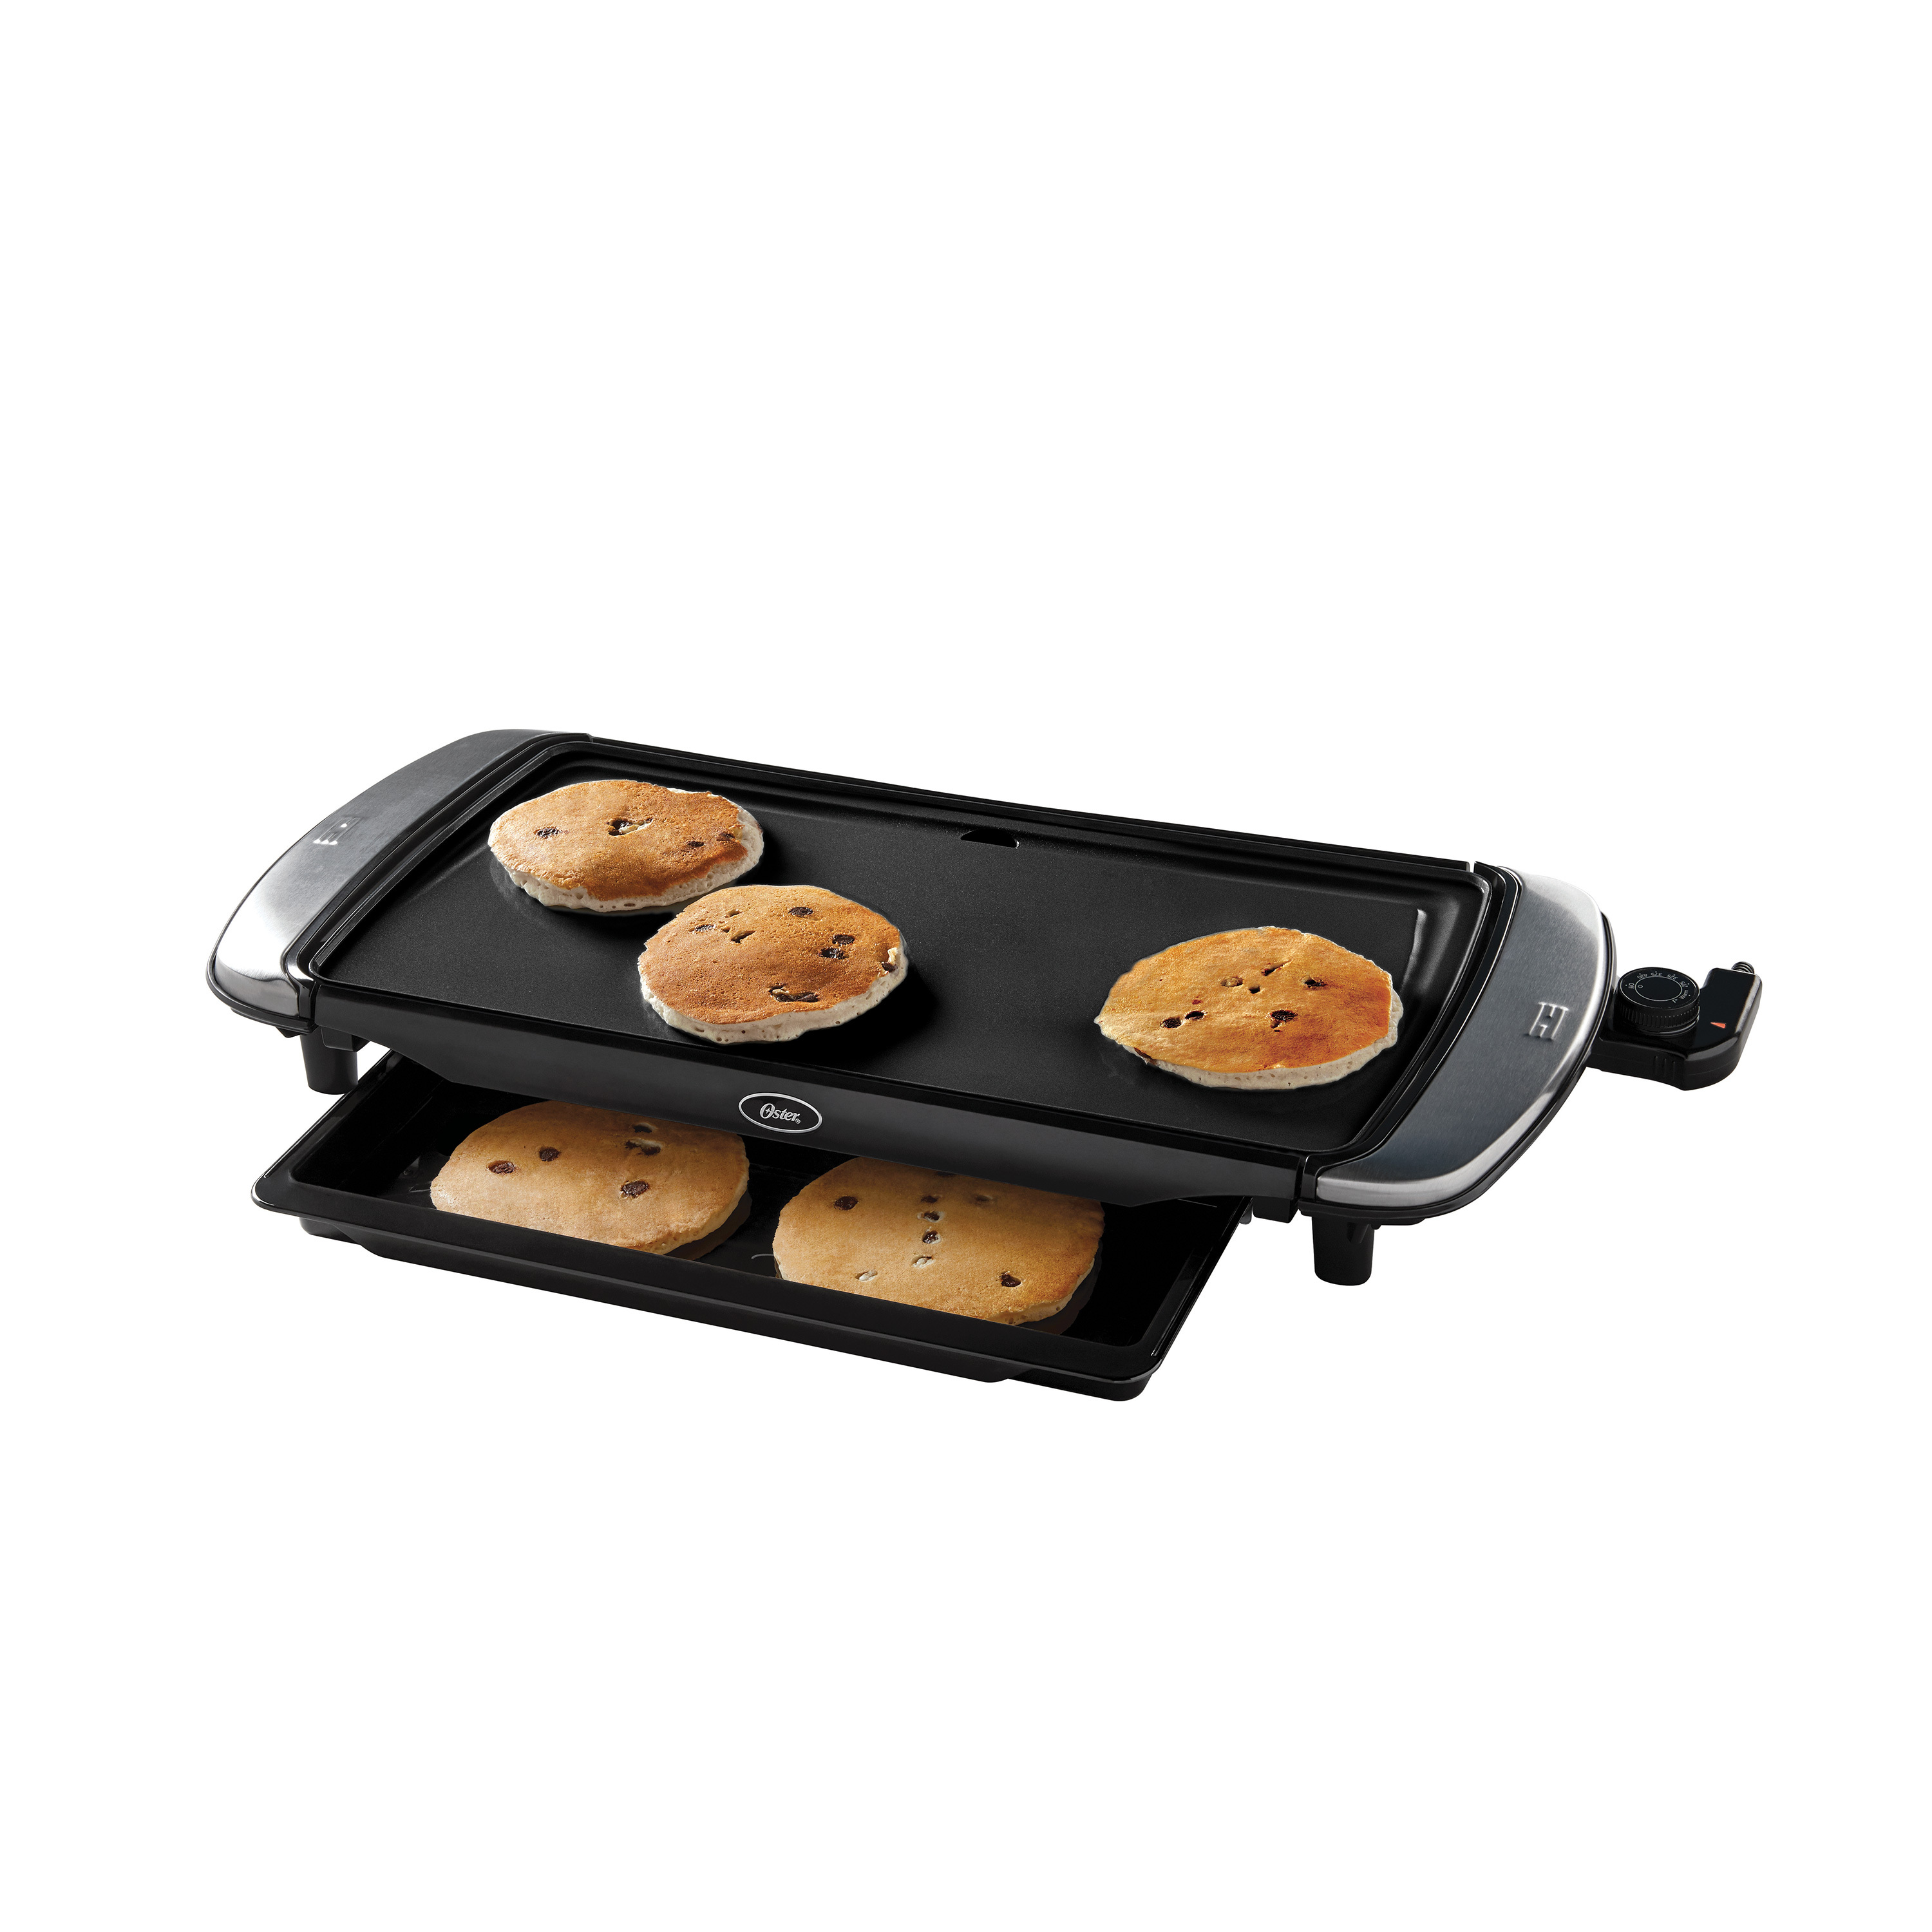 Oster DiamondForce 10-inch x 20-inch Nonstick Electric Griddle with Warming Tray, Black - image 1 of 9